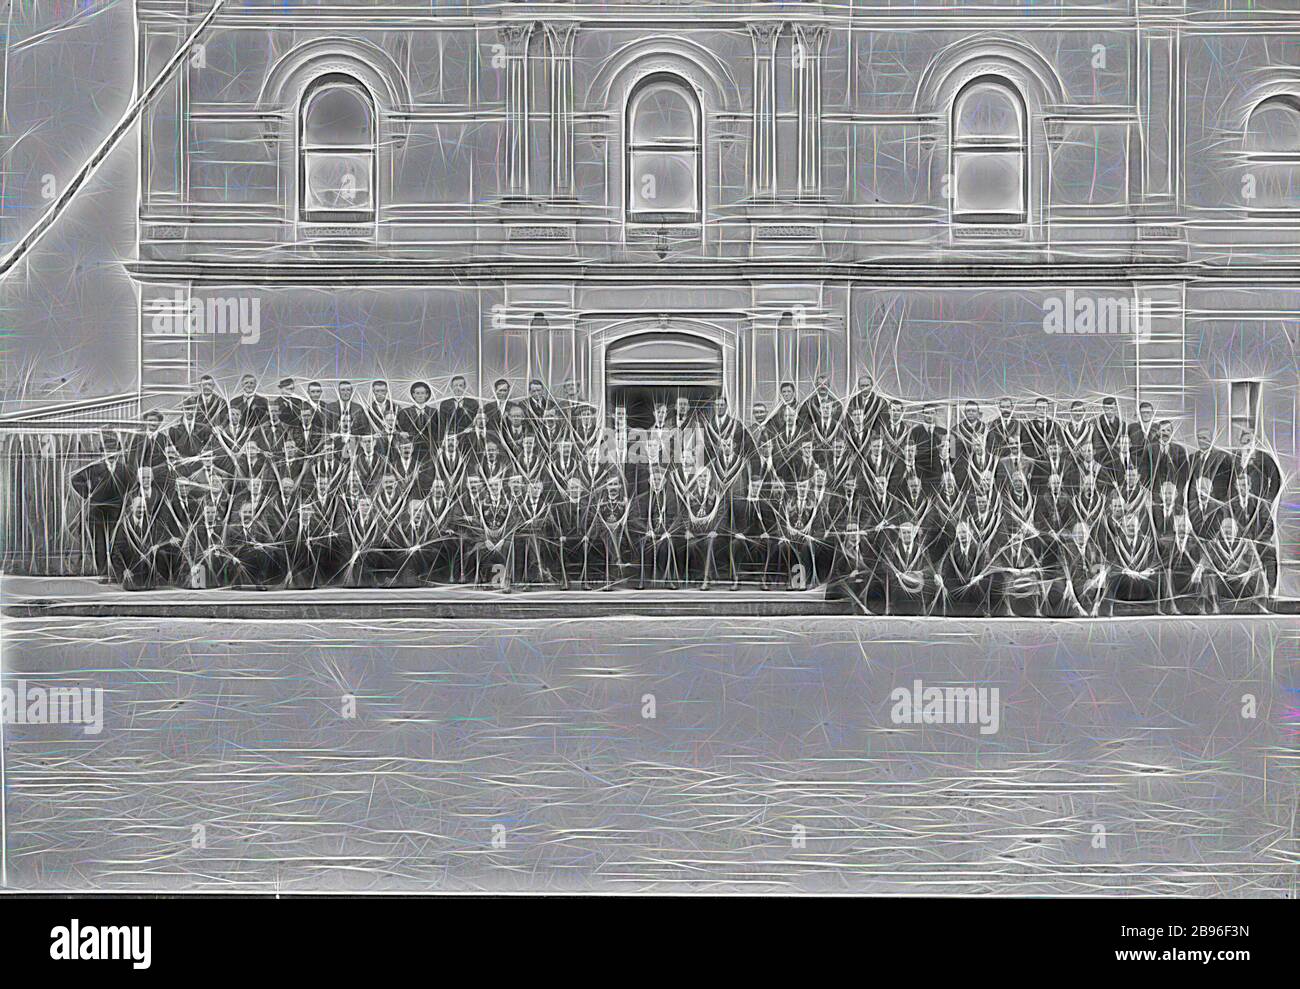 Negative - Hibernian Society, Bendigo, Victoria, circa 1917, The annual conference of the Hibernian Society. The Bendigo Town Hall is in the background., Reimagined by Gibon, design of warm cheerful glowing of brightness and light rays radiance. Classic art reinvented with a modern twist. Photography inspired by futurism, embracing dynamic energy of modern technology, movement, speed and revolutionize culture. Stock Photo